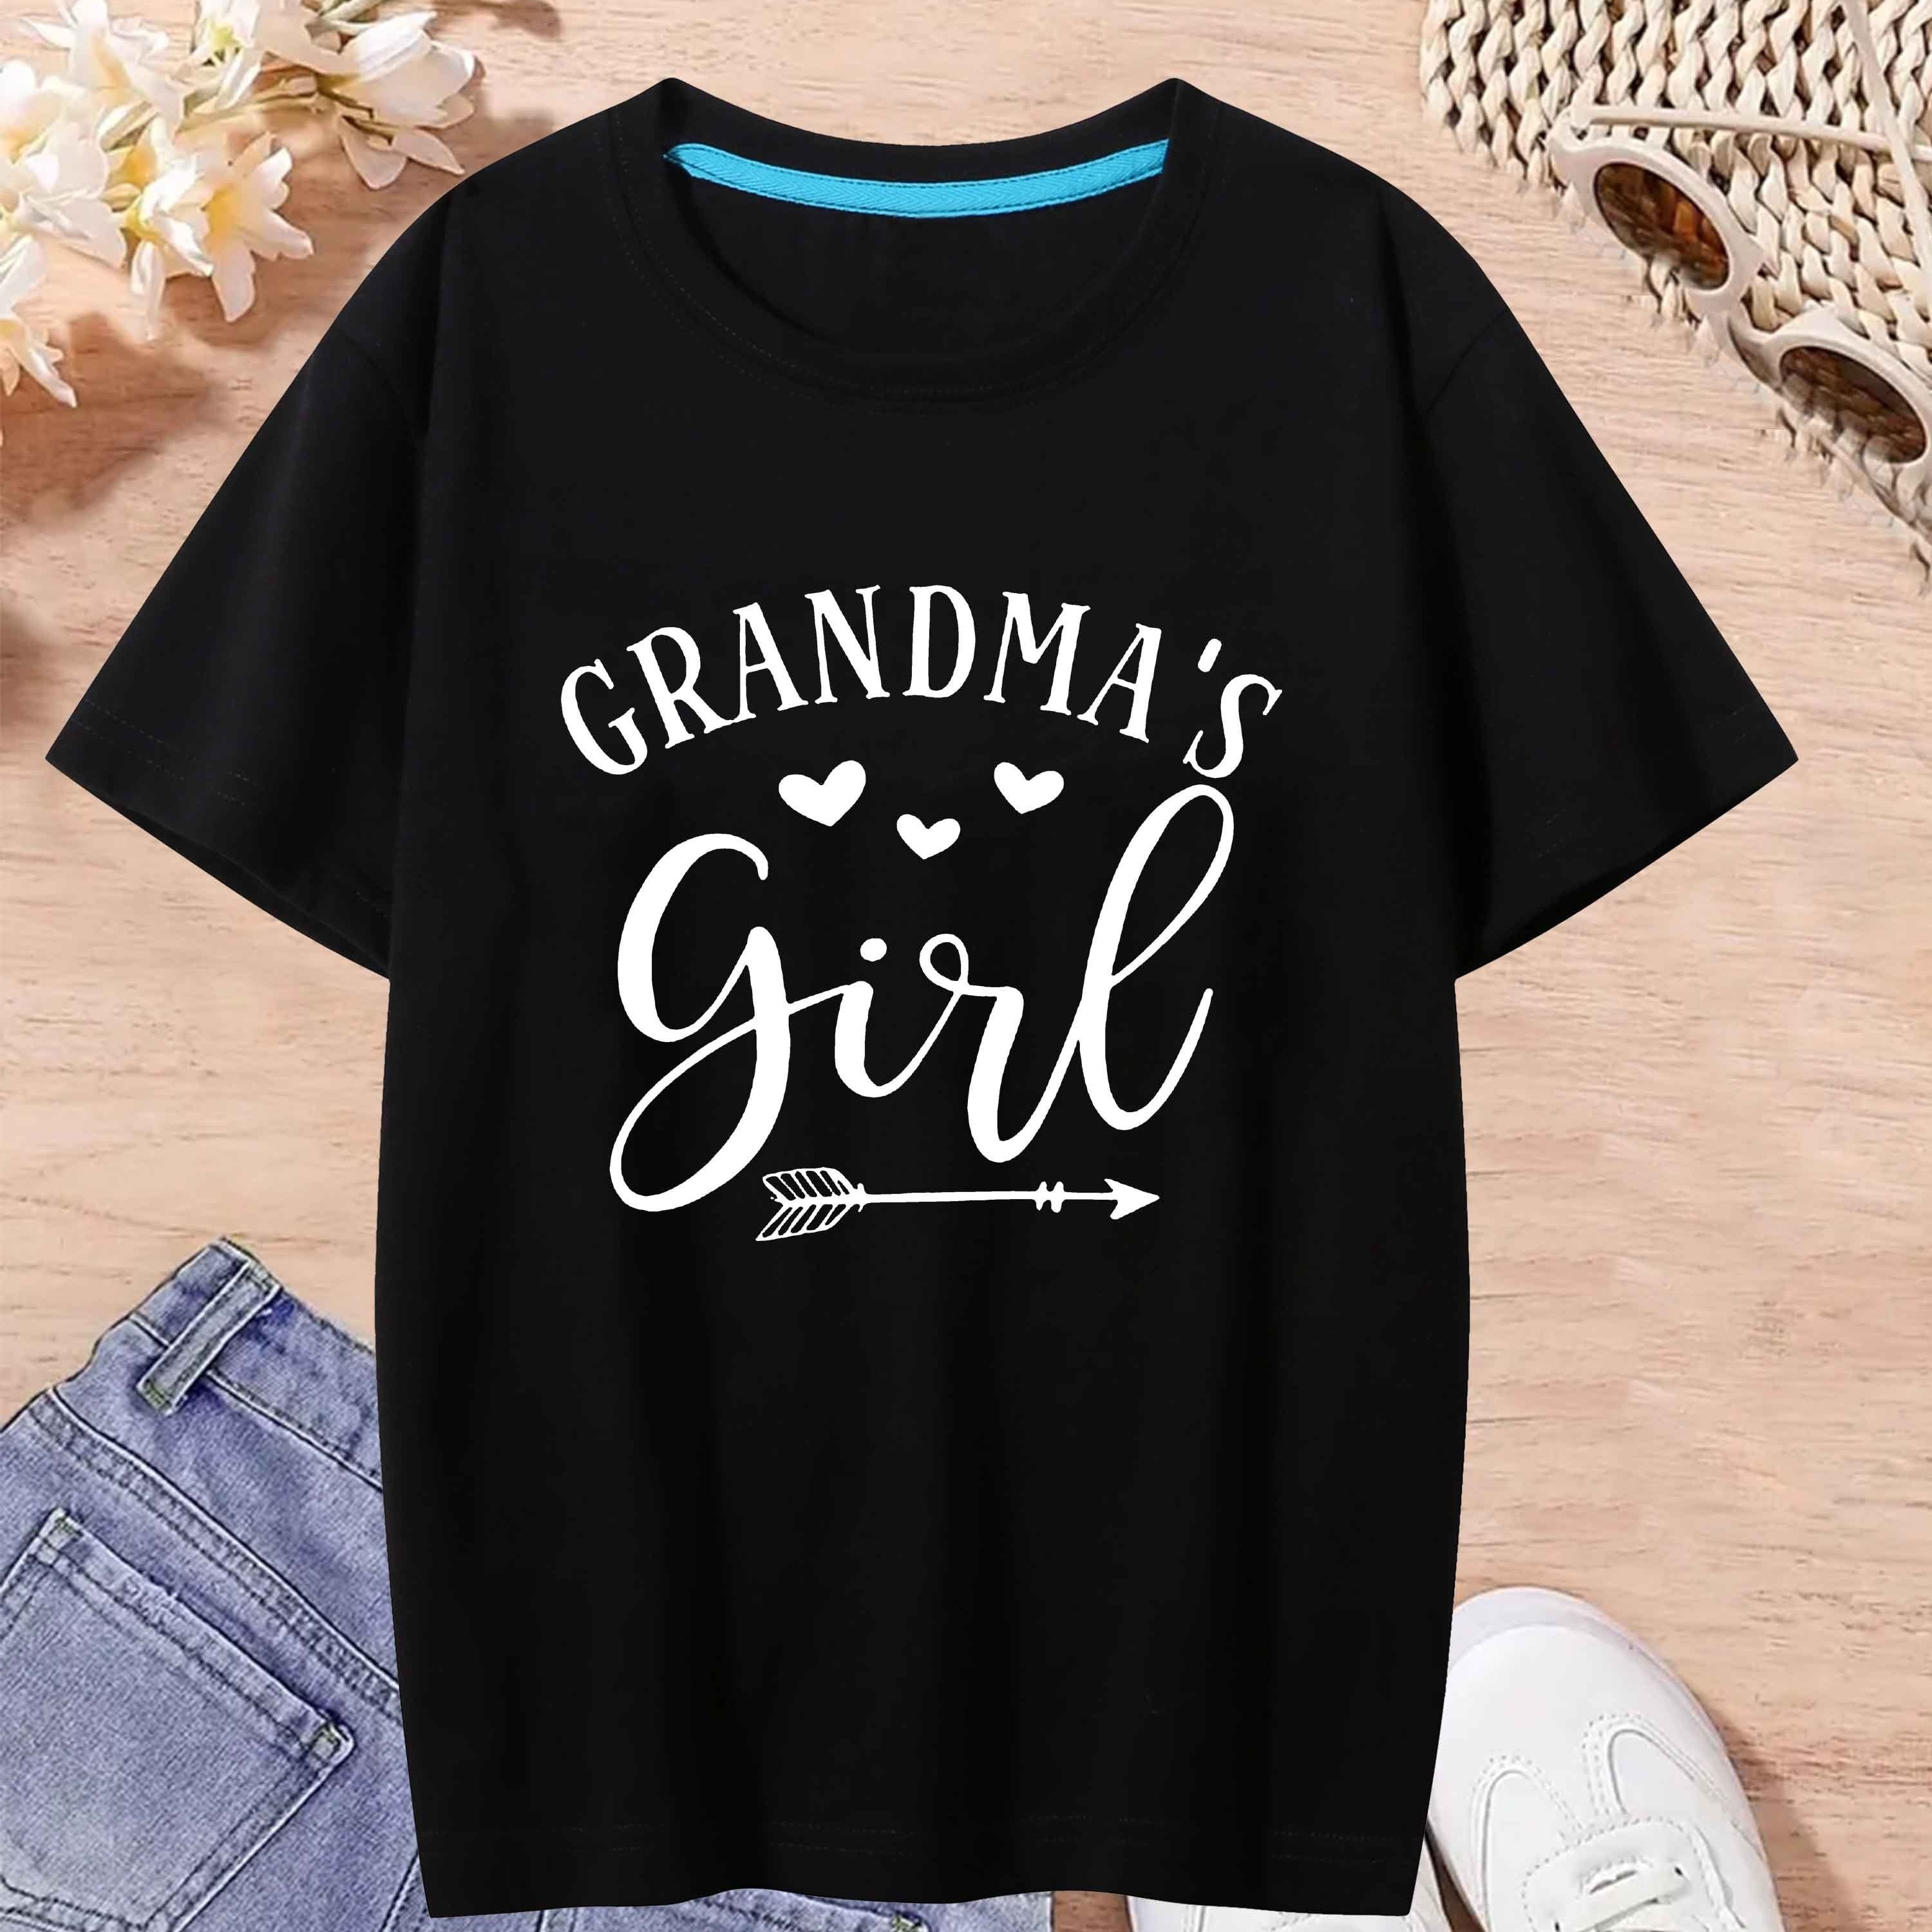 

grandma's Girl" Print T-shirt For Kids, Casual Short Sleeve Top, Girl's Clothes